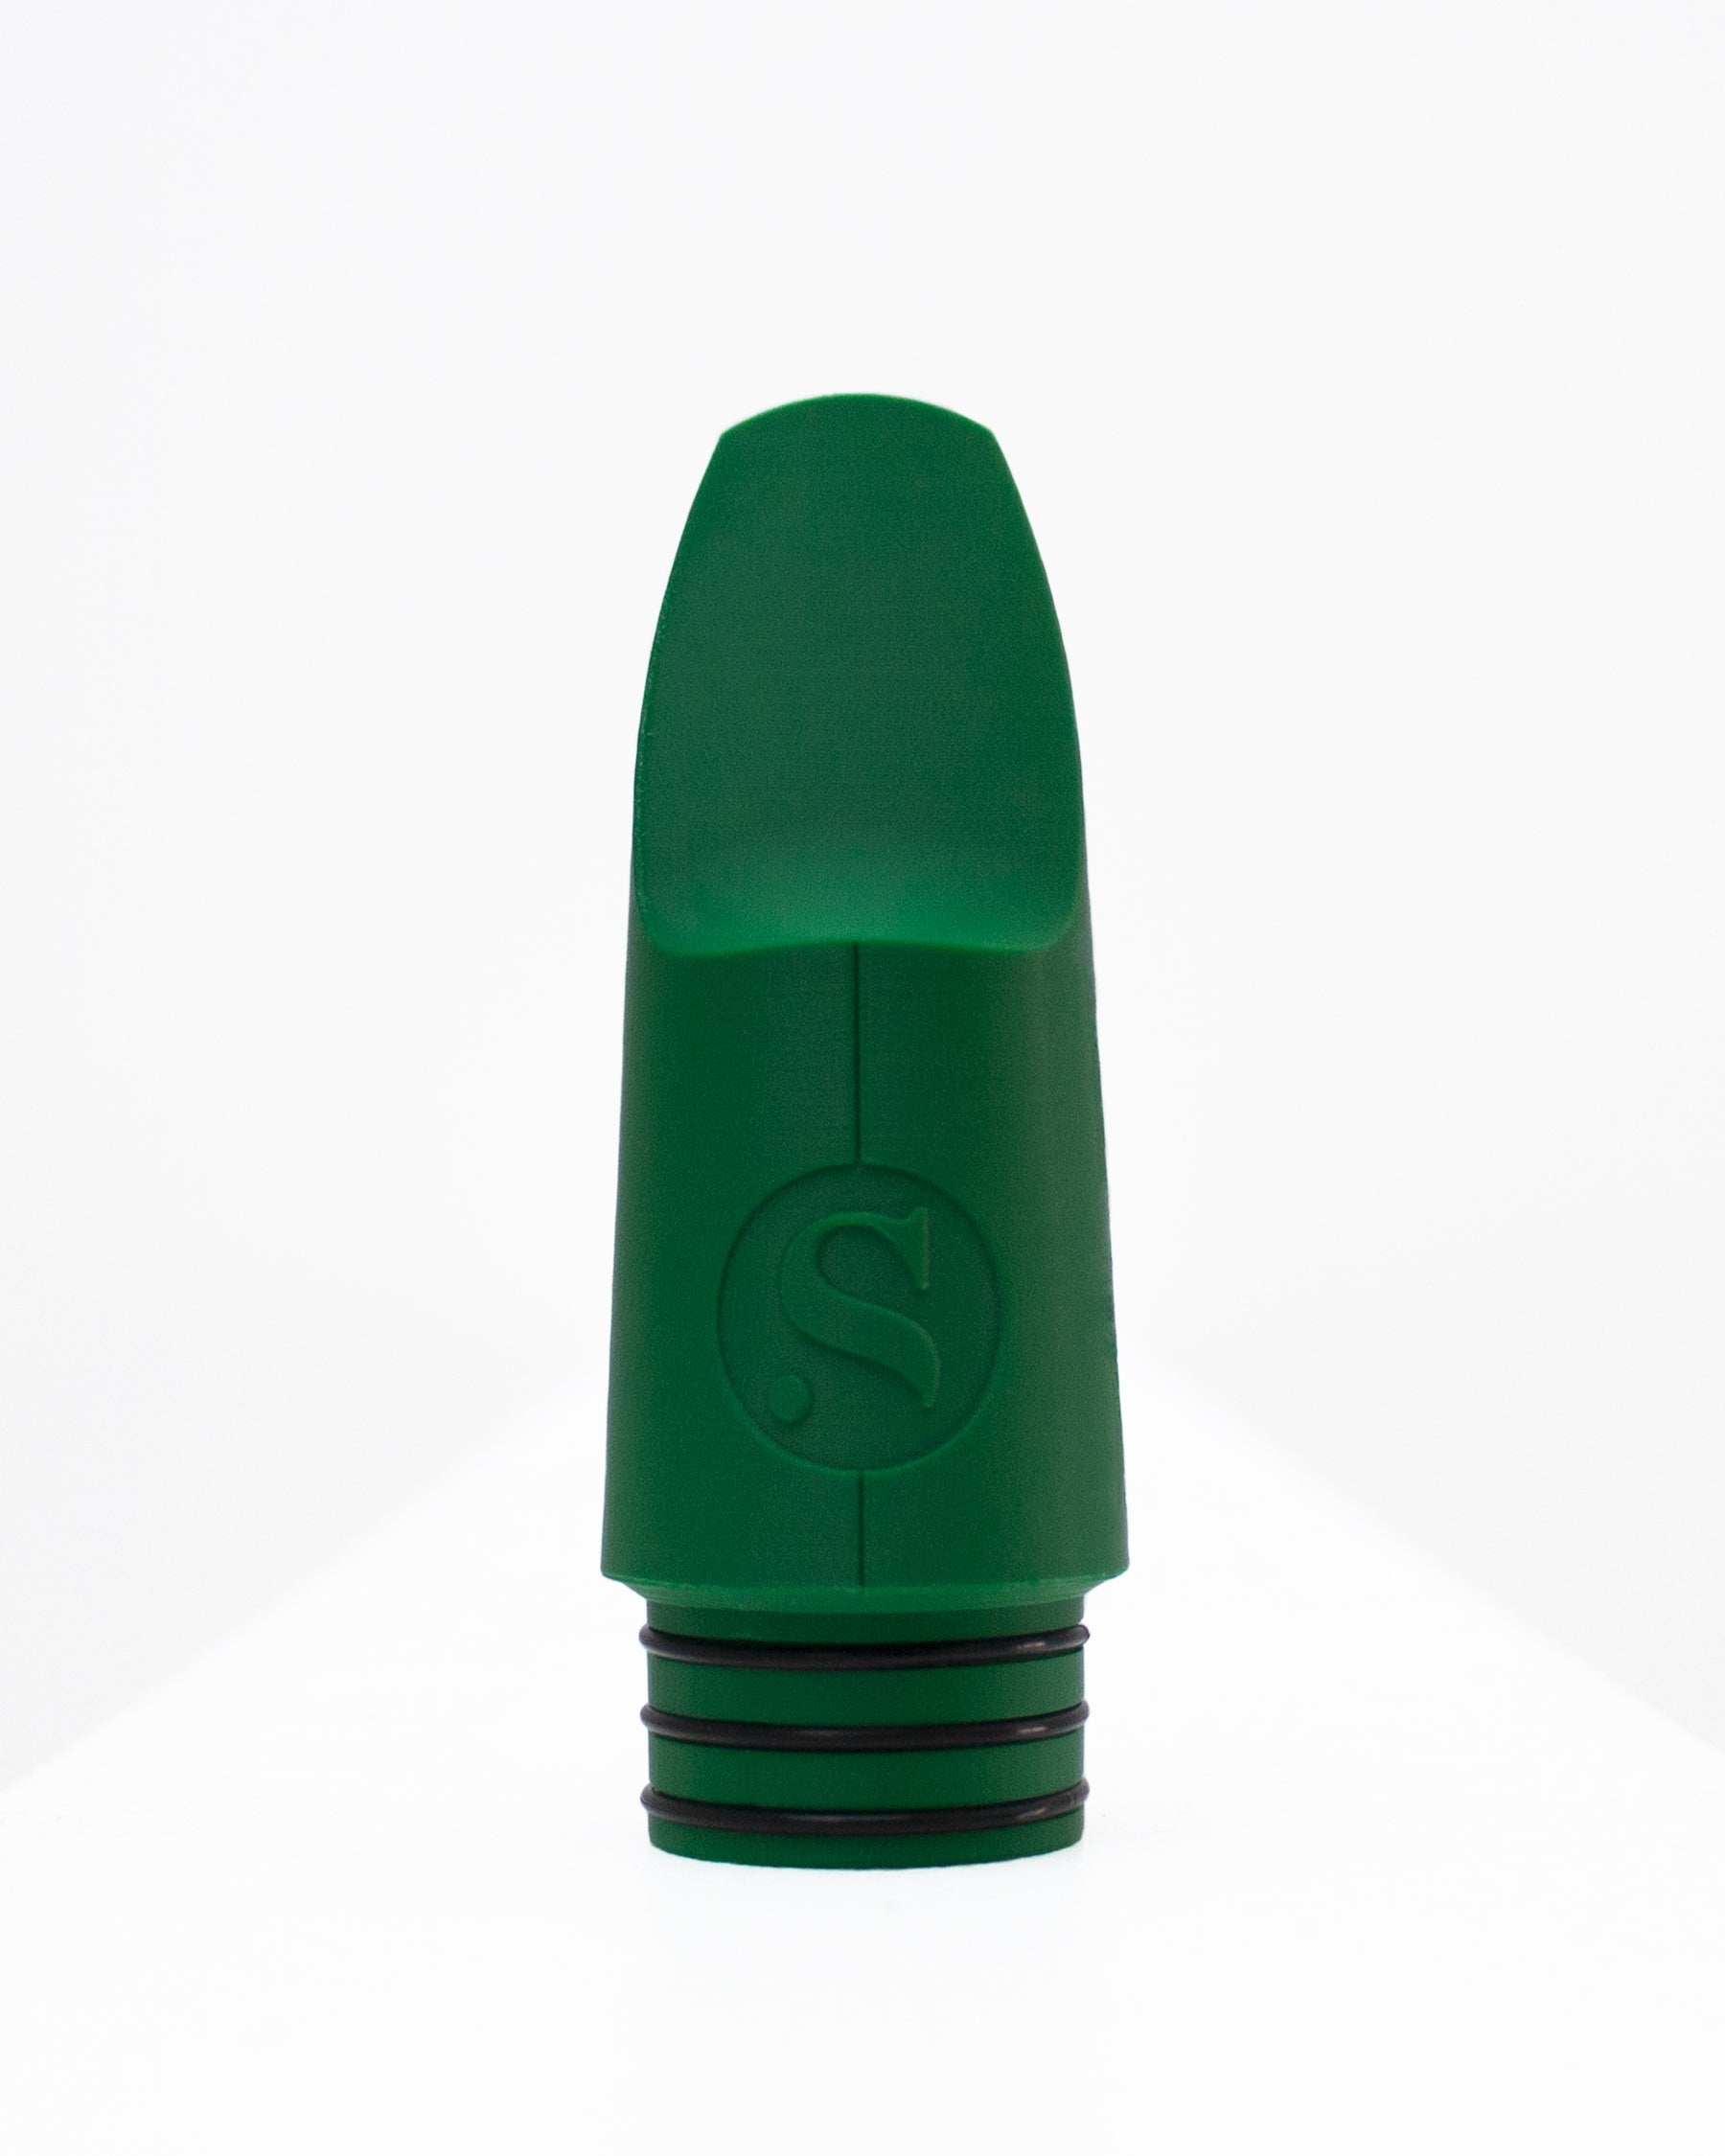 Bass Originals Clarinet mouthpiece - Smoky by Syos - 6 / Forest Green